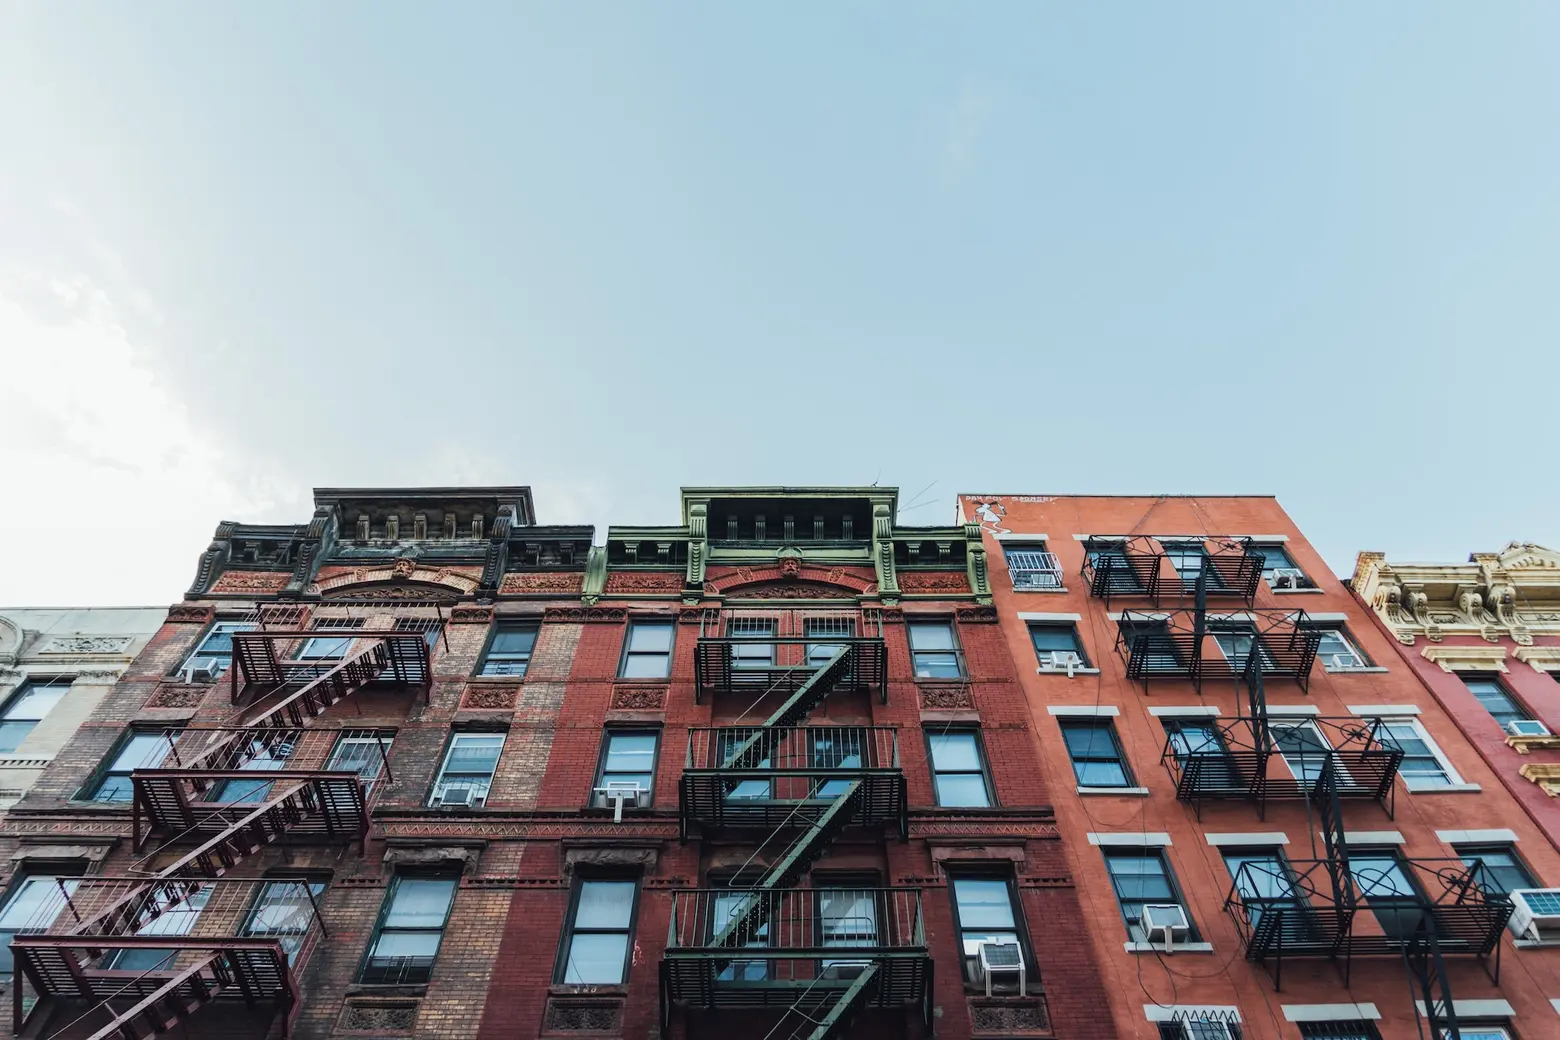 Rent Guidelines Board recommends increases between 2.5% and 3.5% for rent-stabilized units